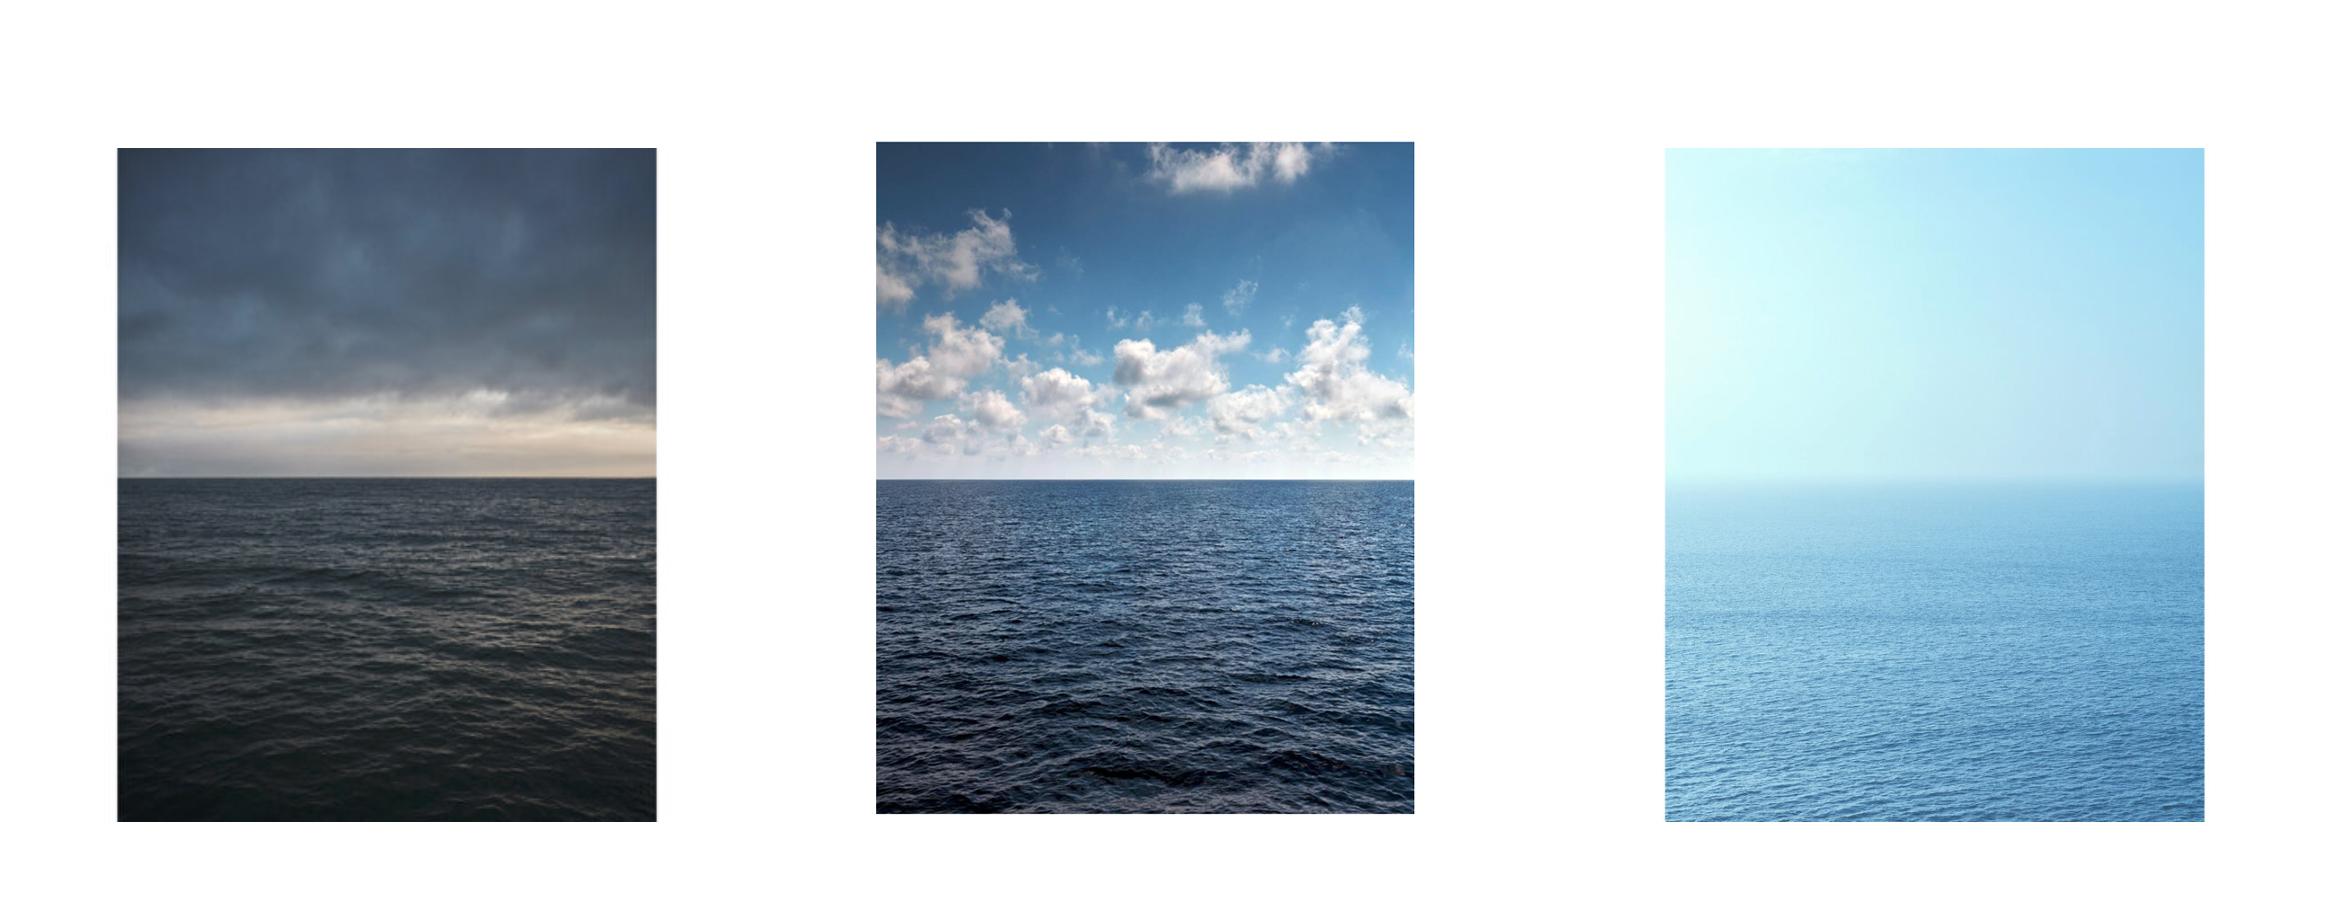 large scale abstract photograph of muted color monochromatic water surface and horizon

SEASCAPE IV by Frank Schott
an homage to Mark Rothko

70 x 56 inches / 177cm x 142cm 
signed edition of 7

Matte Hahnmuehle archival quality fine art pigment